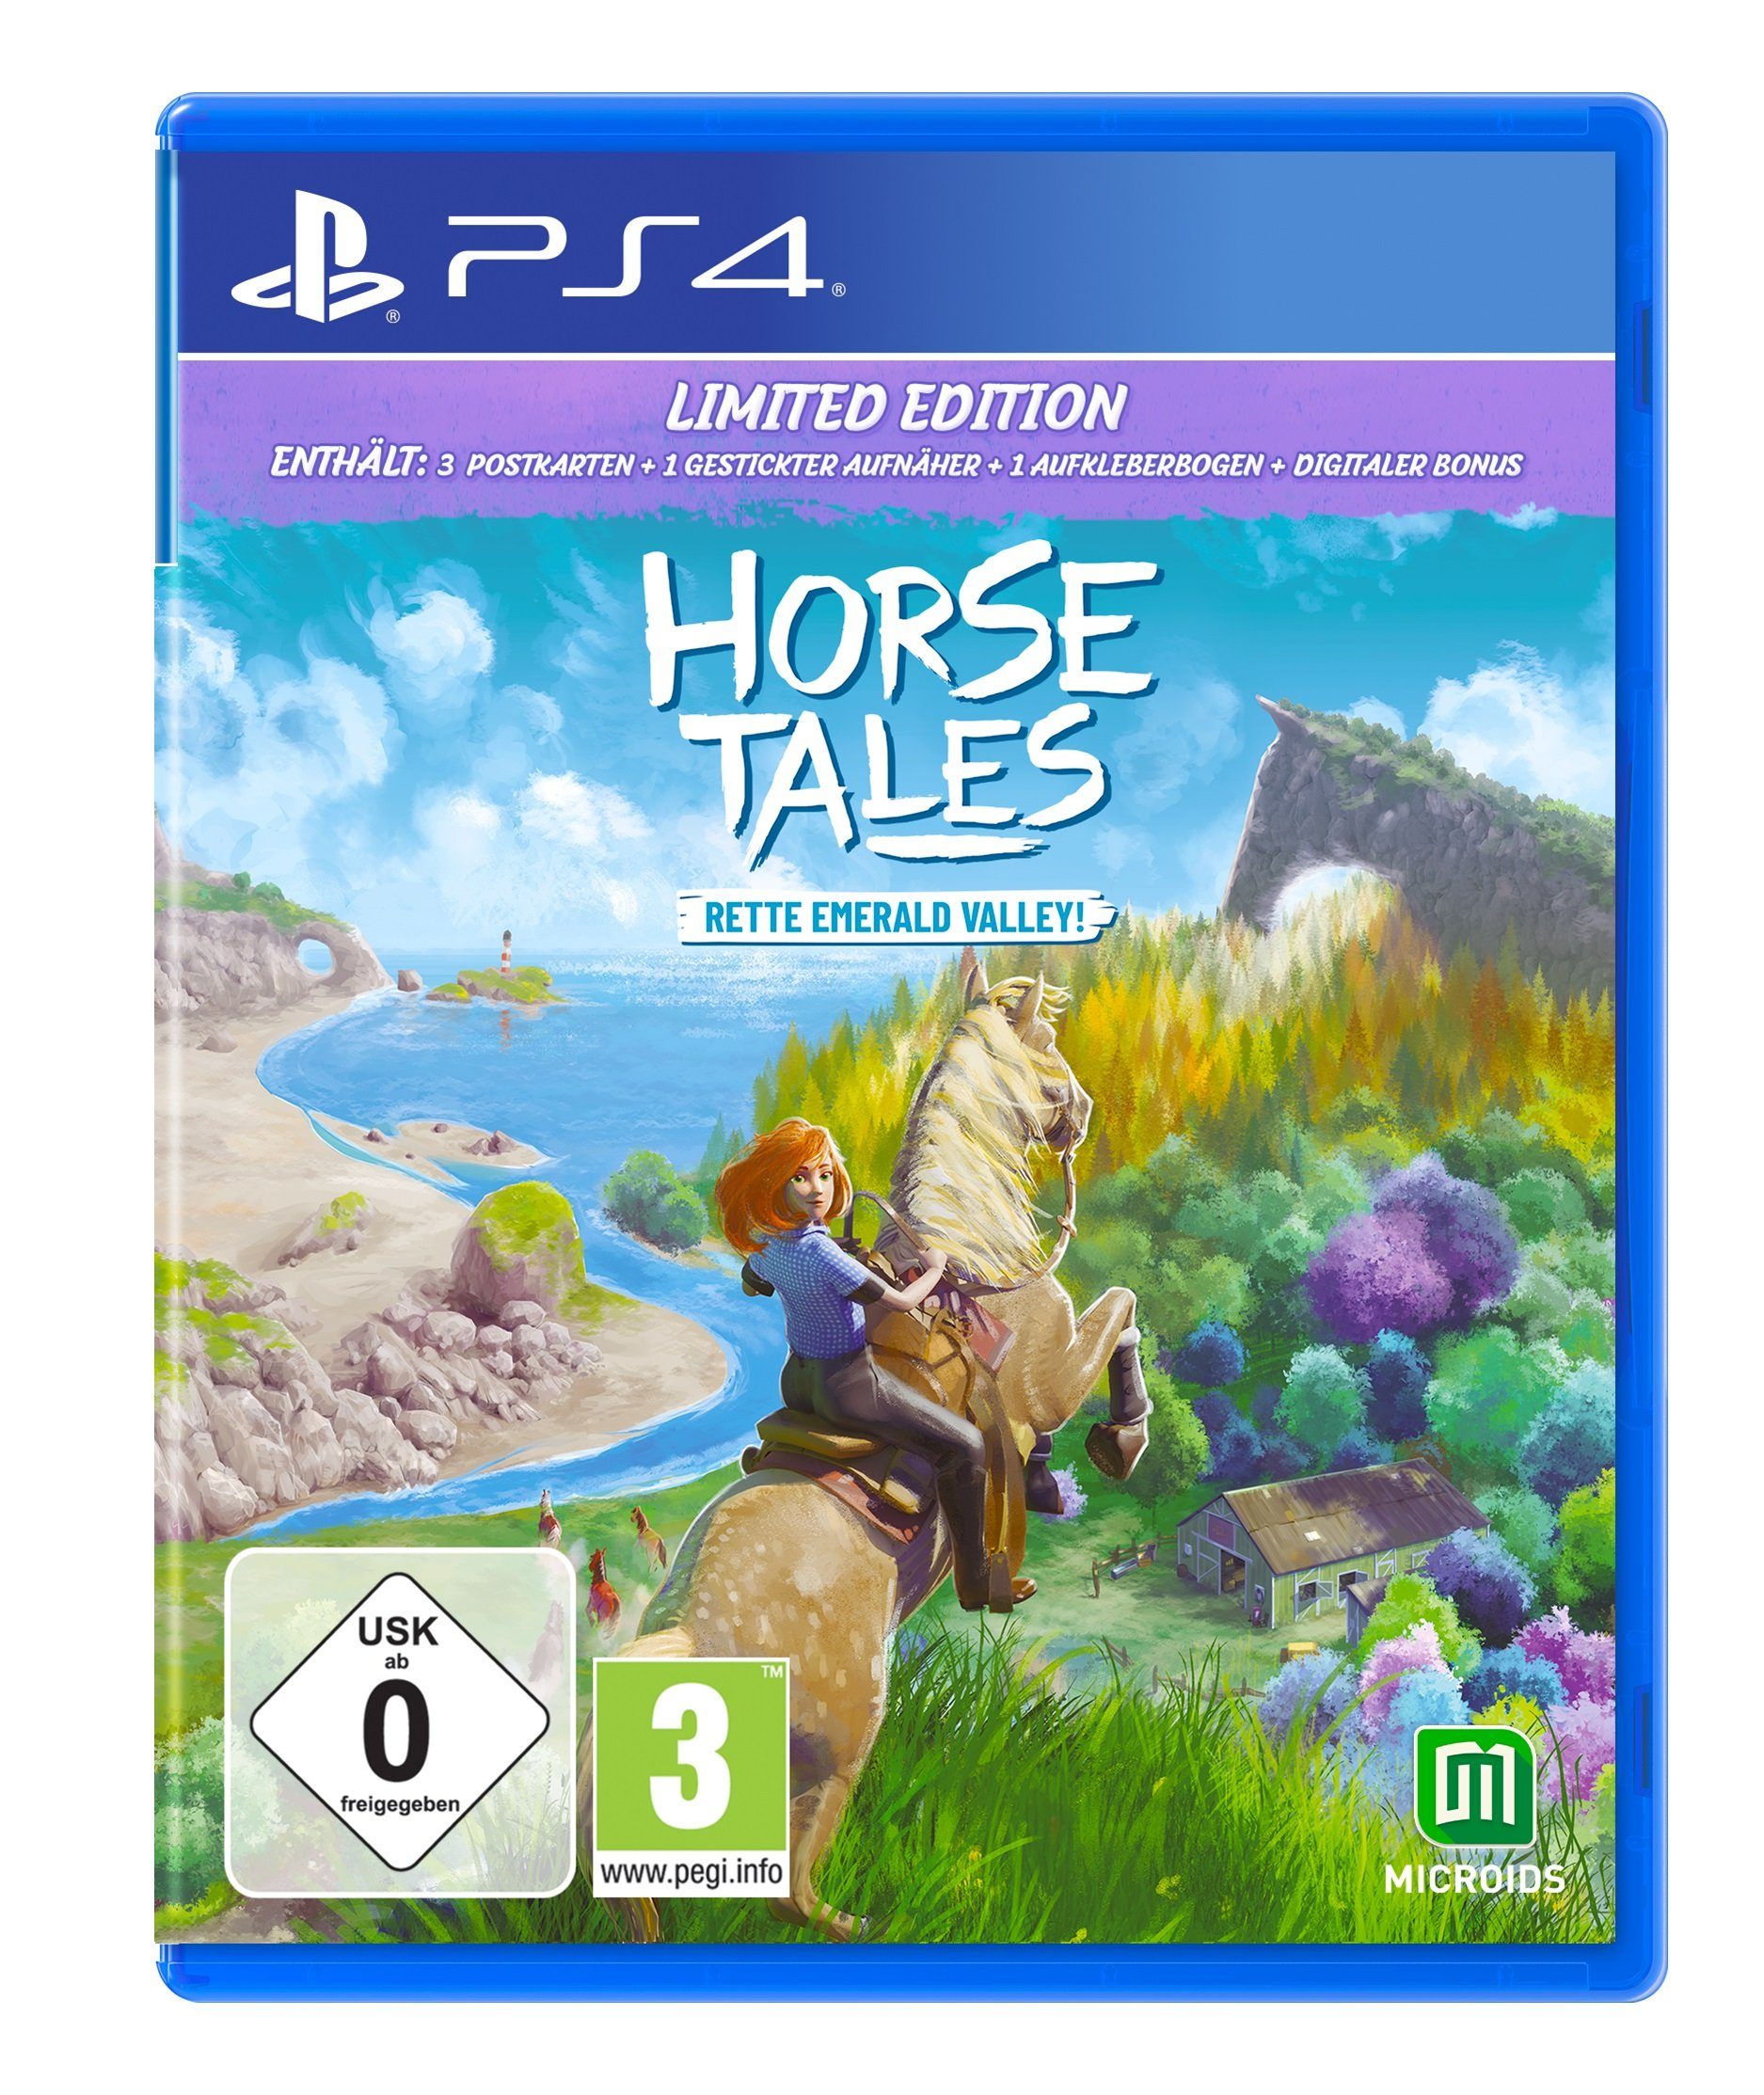 Horse Tales: Rette Emerald Valley! PlayStation 4